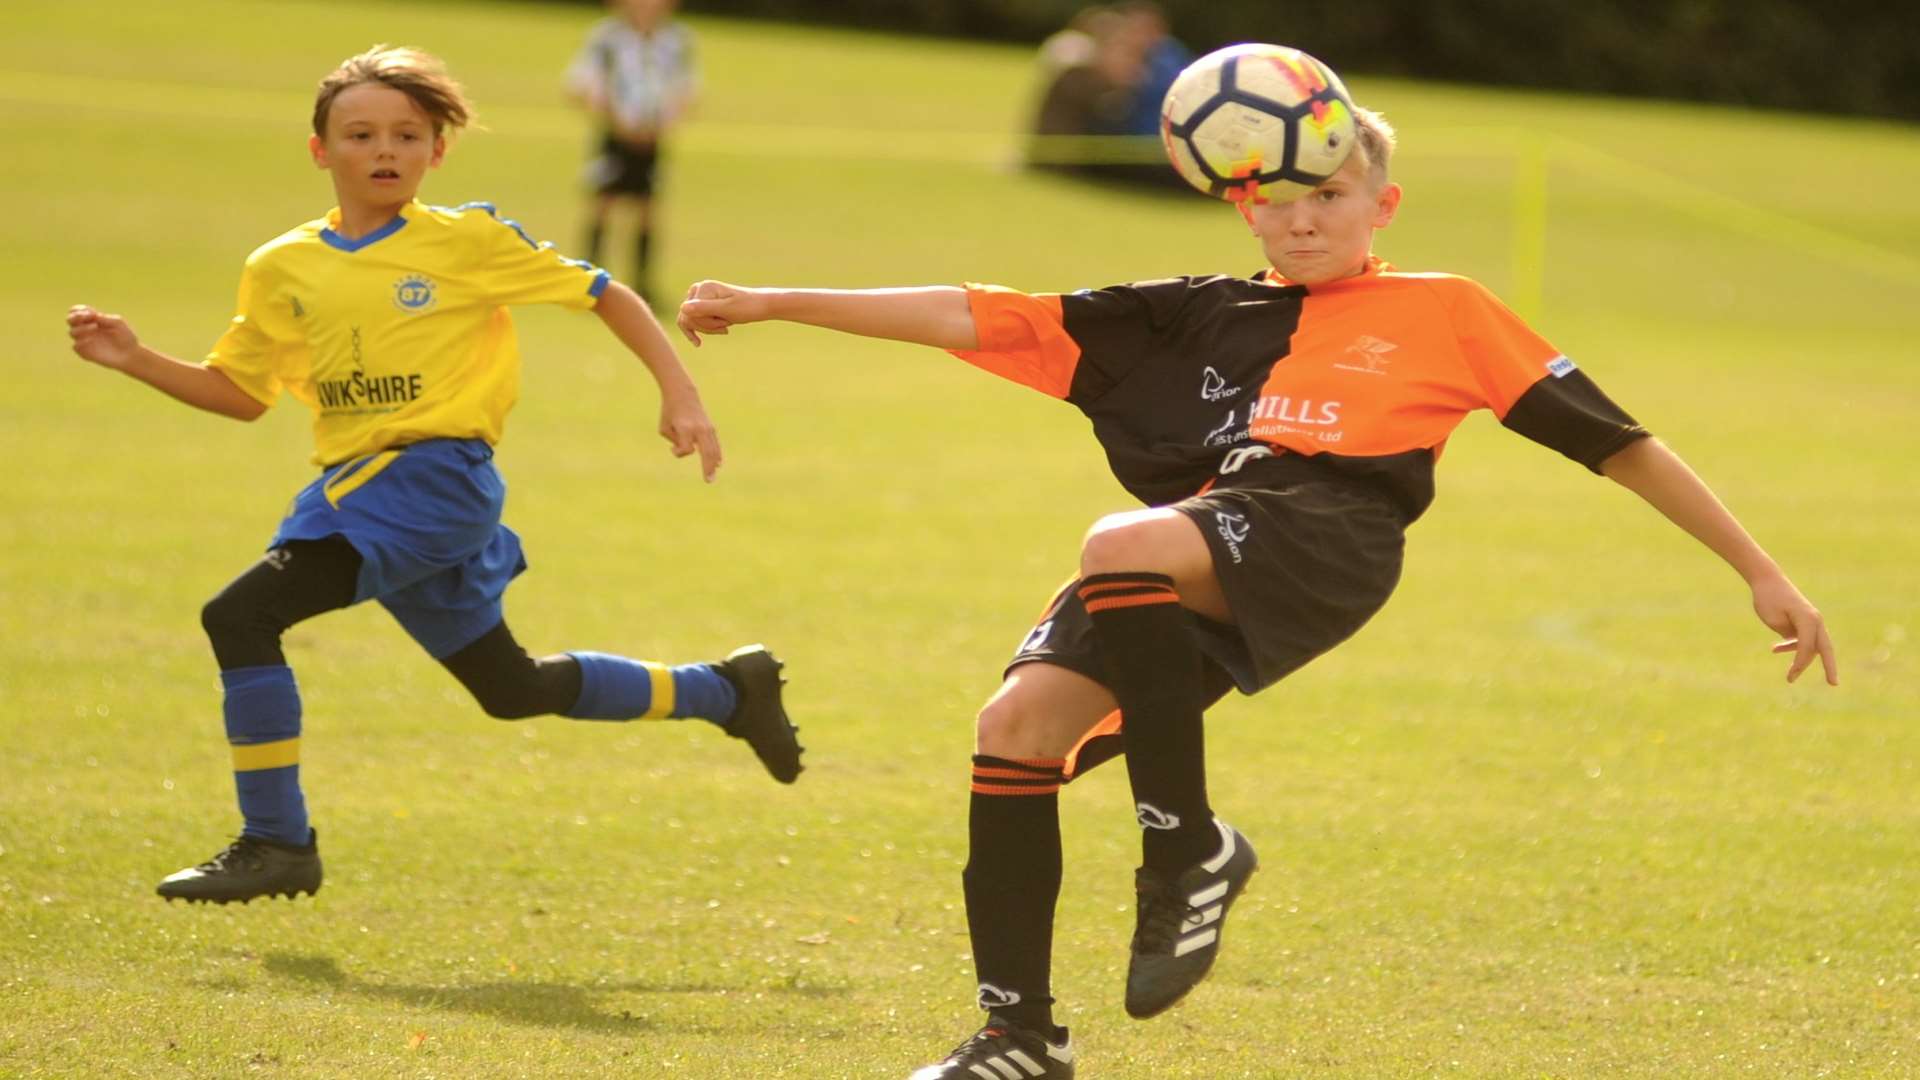 Strood 87 and Pegasus 81 went head-to-head in Under-13 Division 2 Picture: Steve Crispe